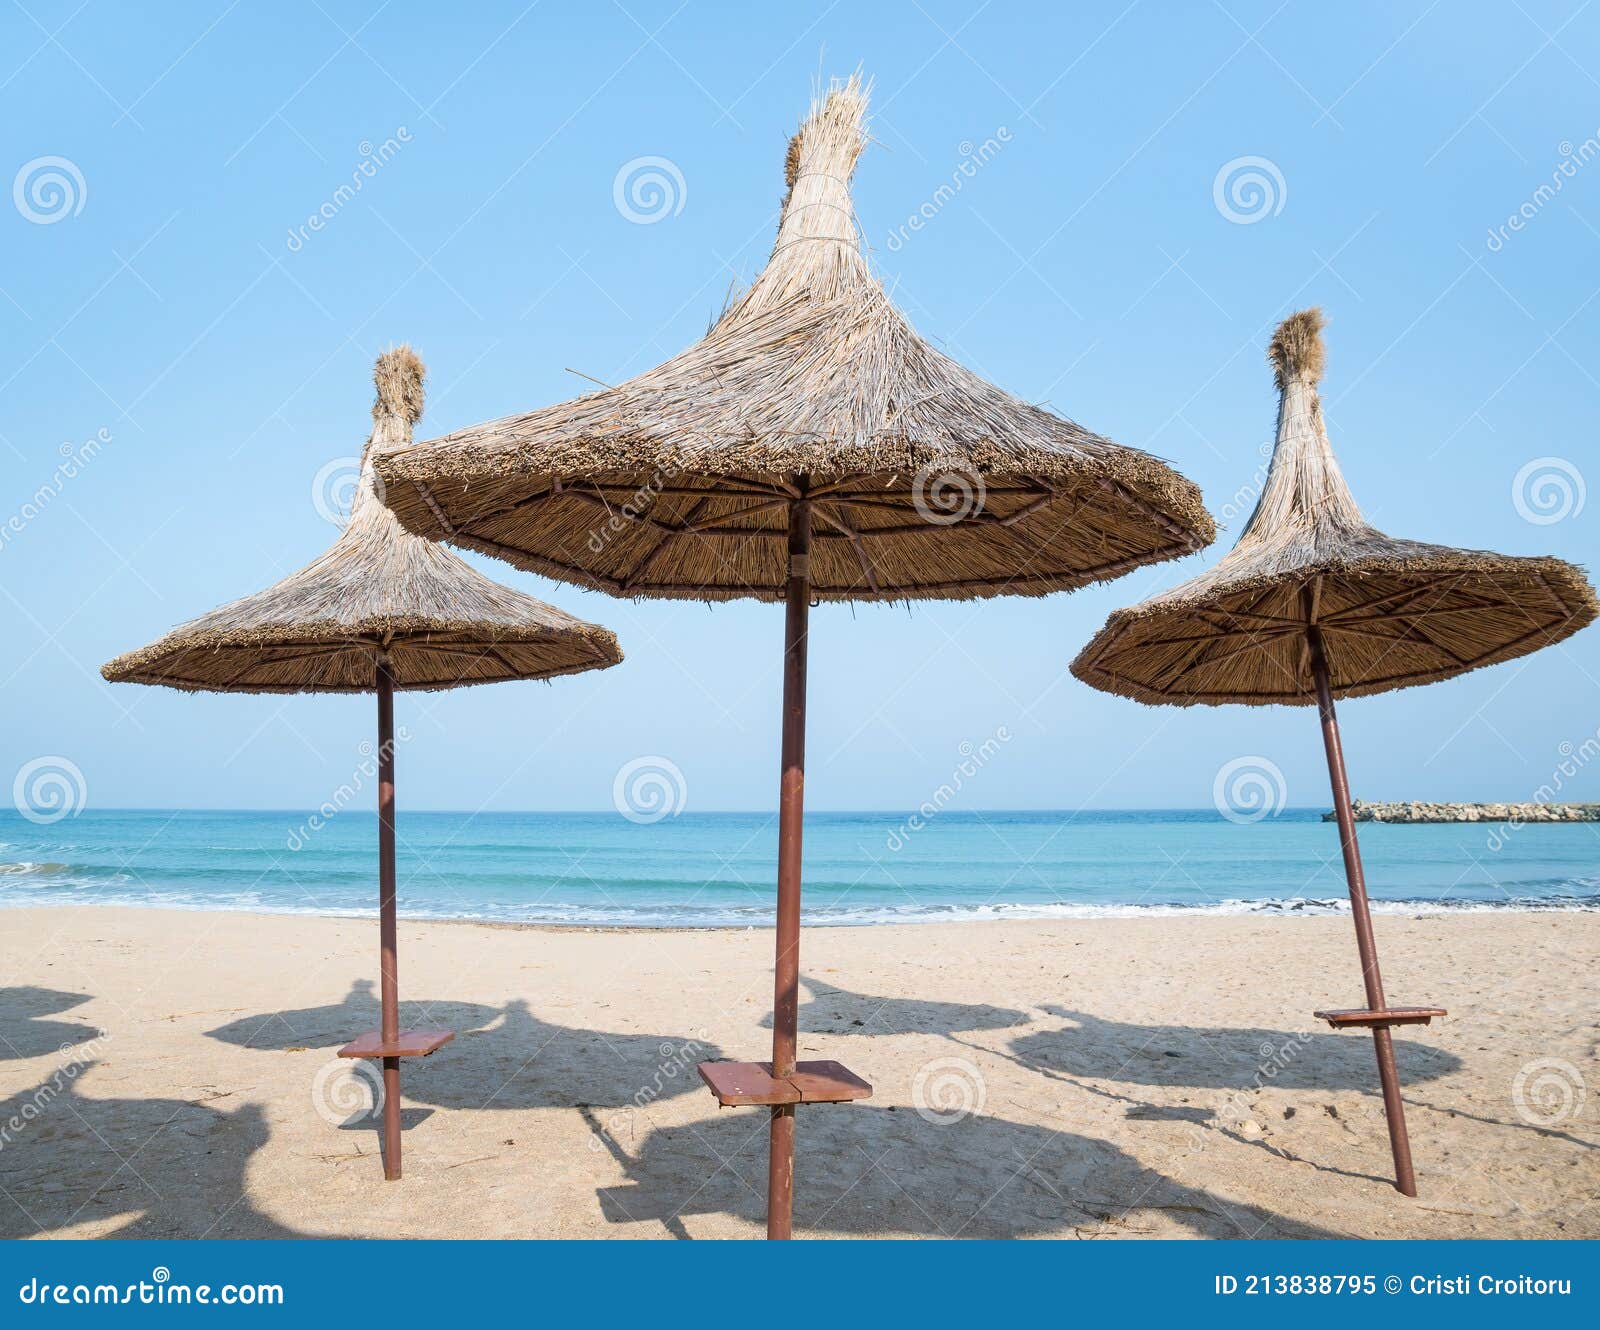 Summer Landscape With Straw Umbrellas On The Beach In Mangalia Or Mamaia Beach At The Black Sea